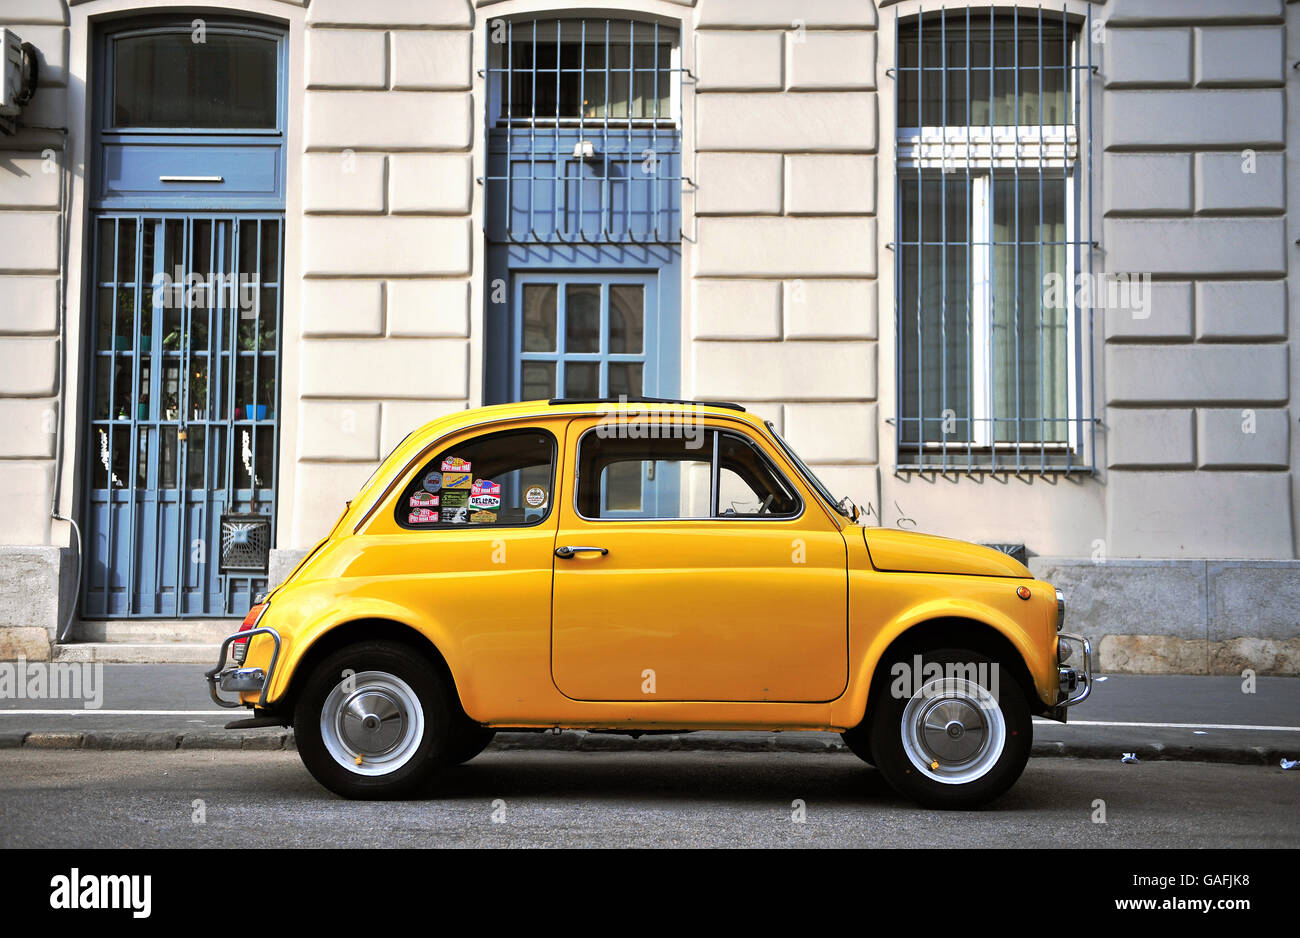 BUDAPEST, HUNGARY - MAY 18: Old fashioned car parked in the street of Budapest on May 18, 2016. Stock Photo